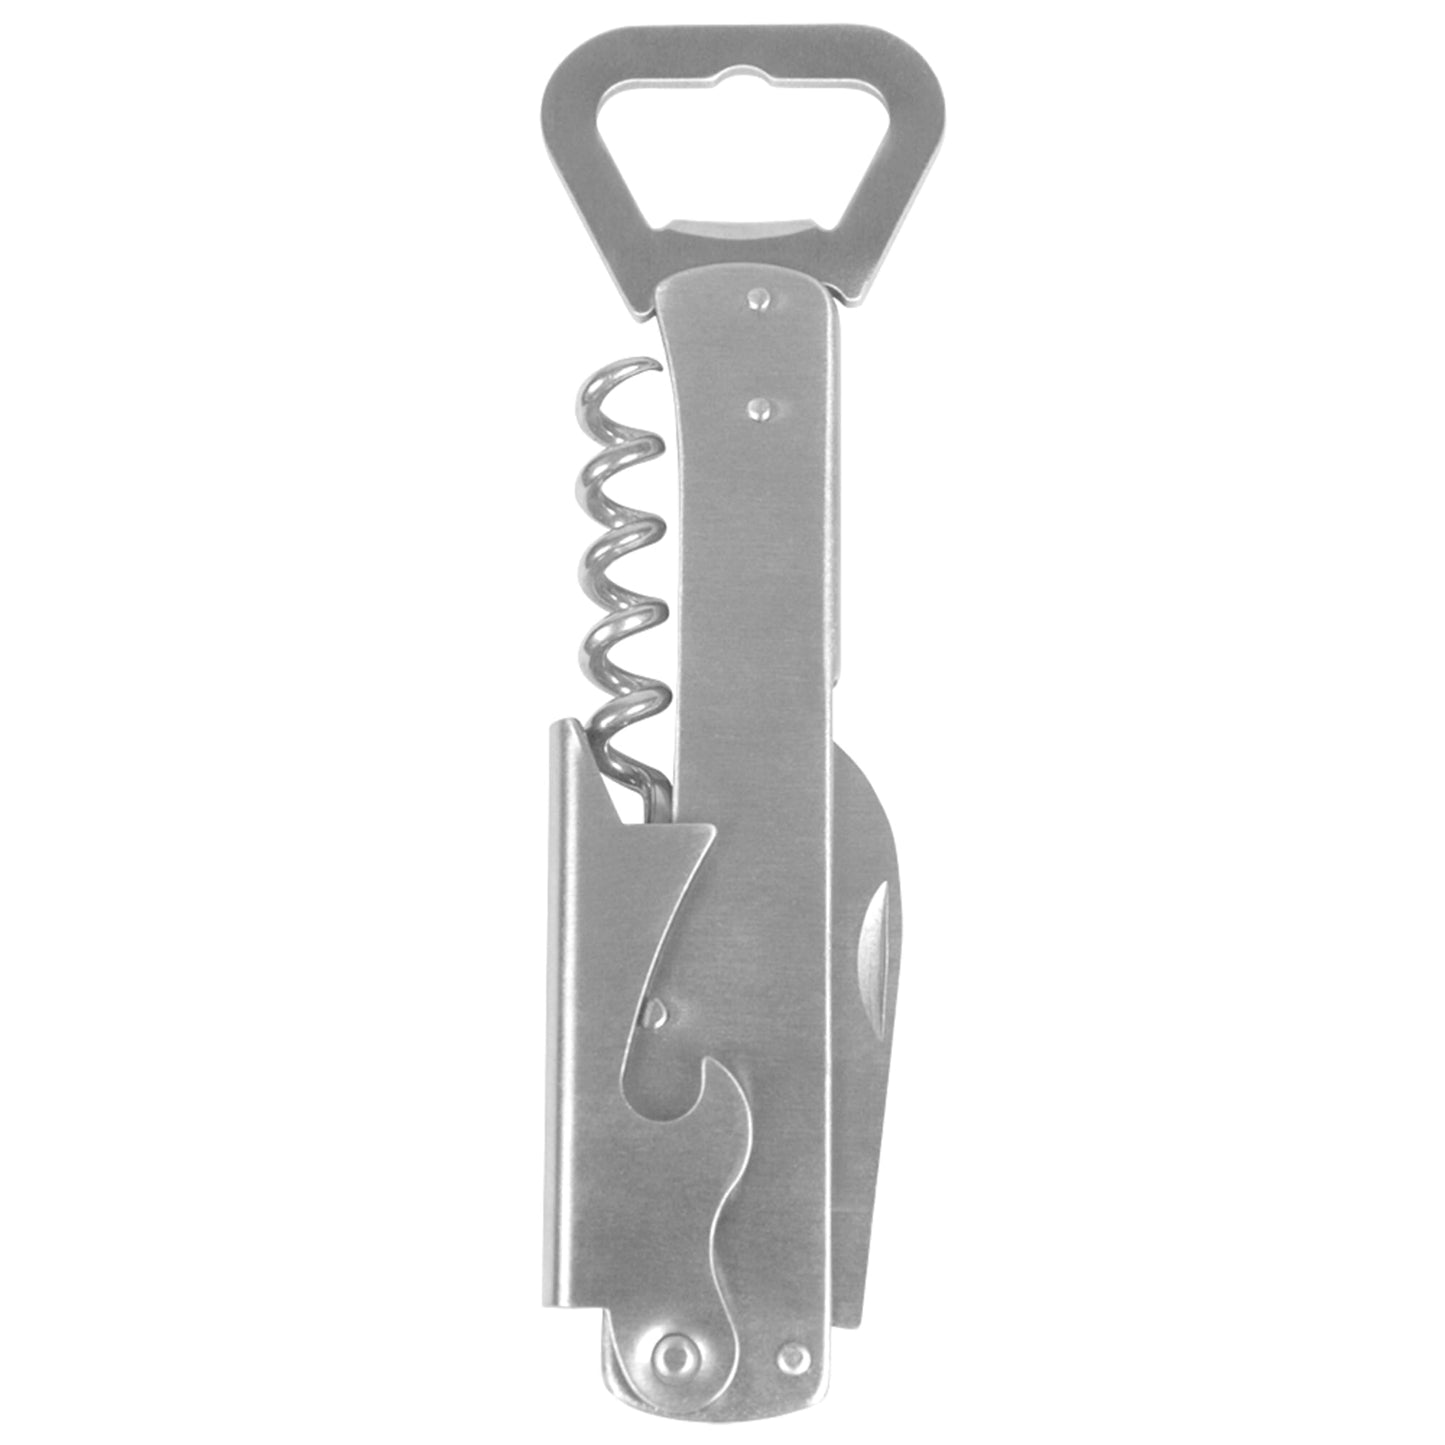 All-in-One  Stainless Steel Corkscrew Bottle Opener with Foil Cutter